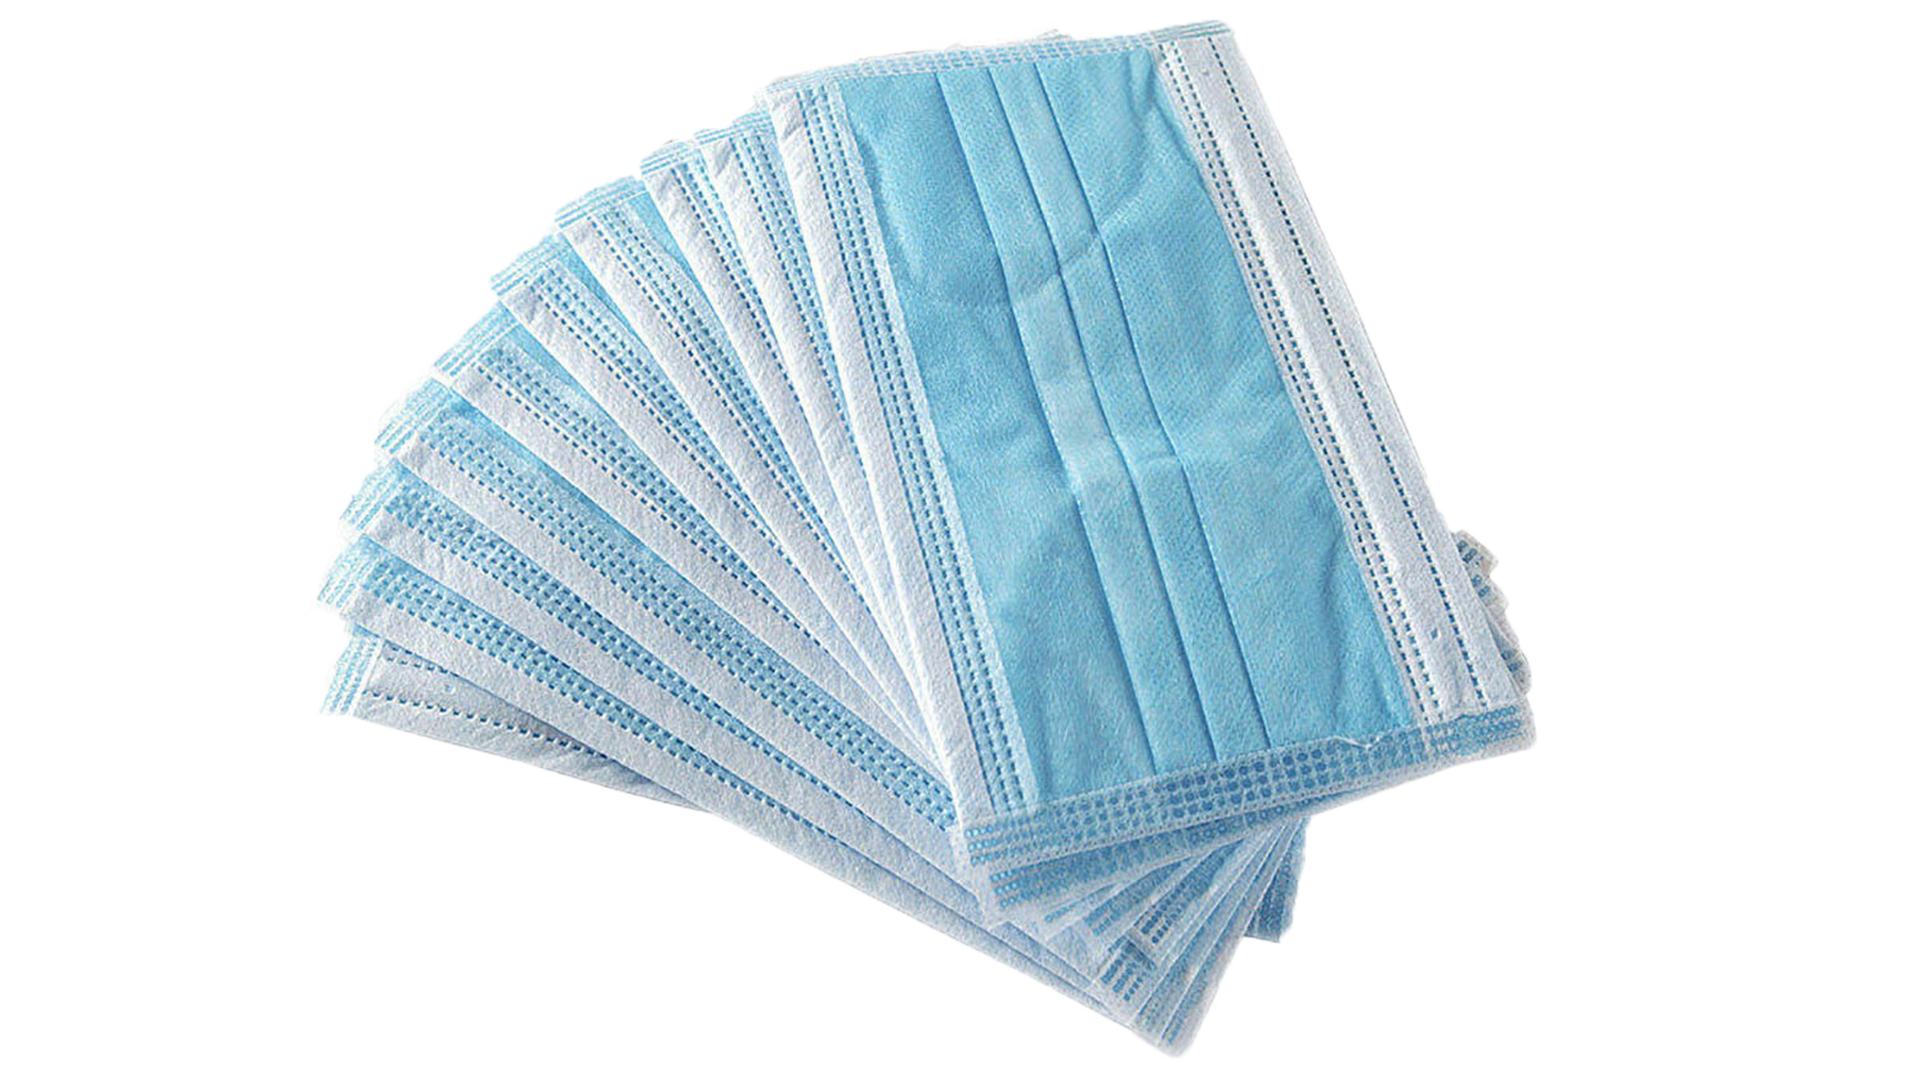 Surgical Pic Mask Free Download Image PNG Image